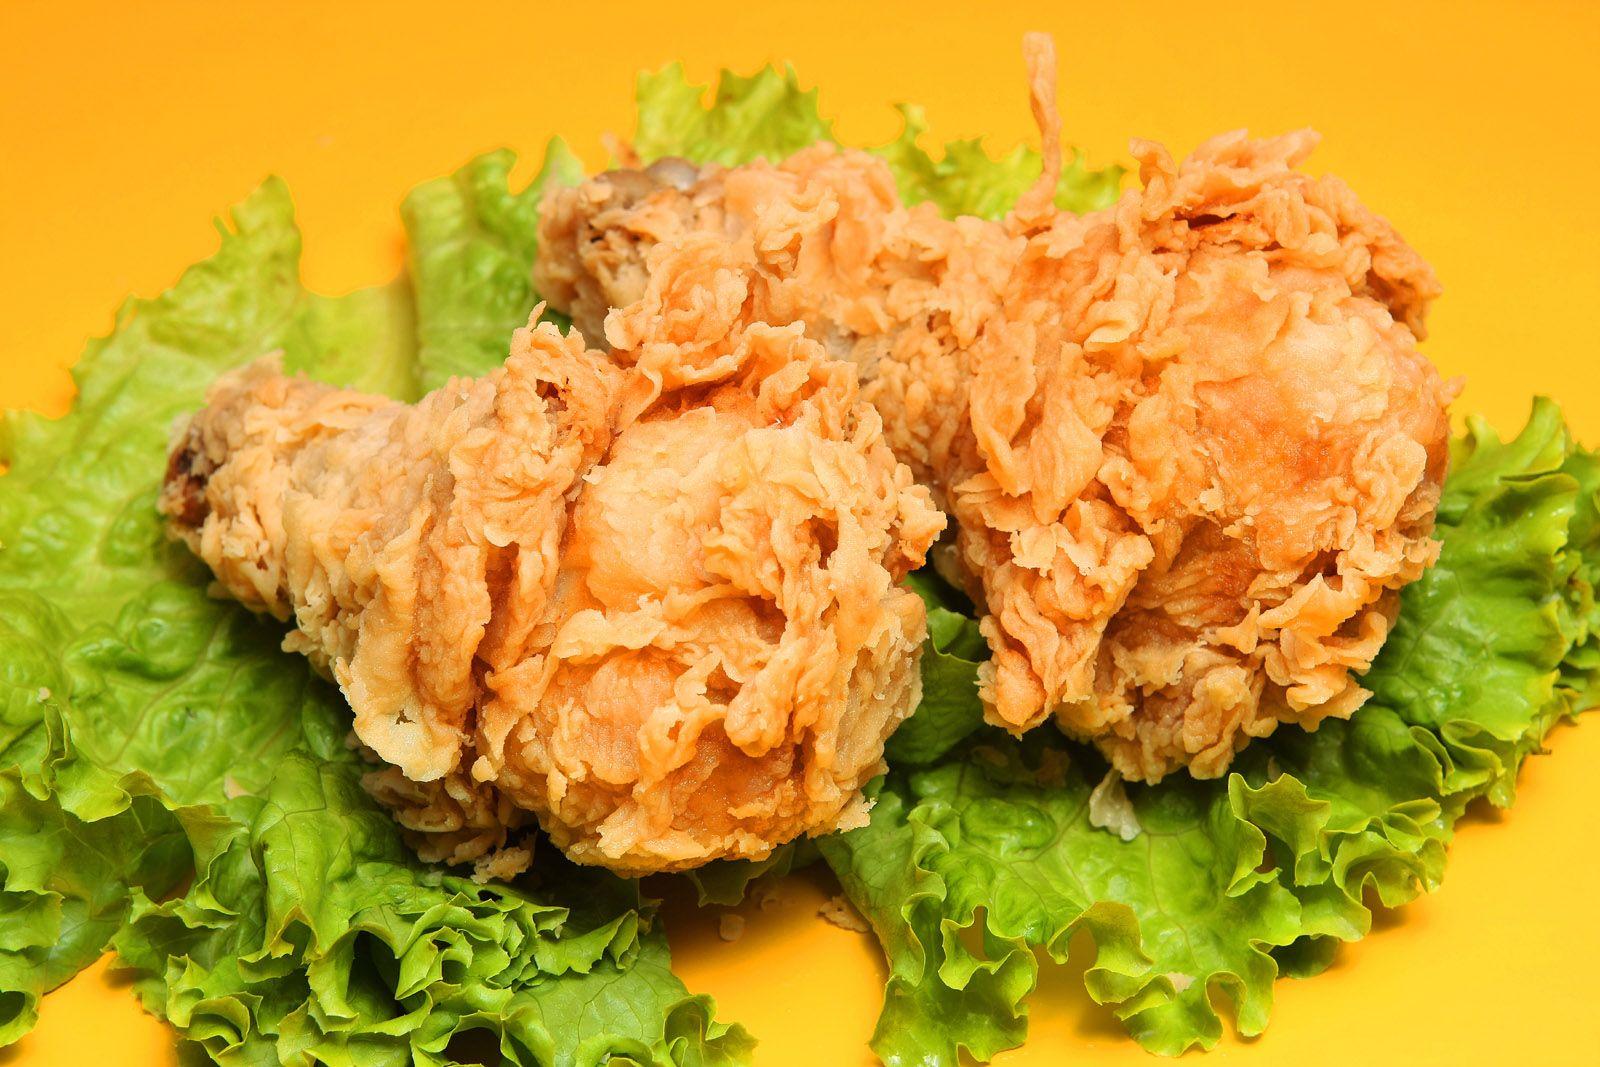 HD hamburgers and fried chicken picture 14013